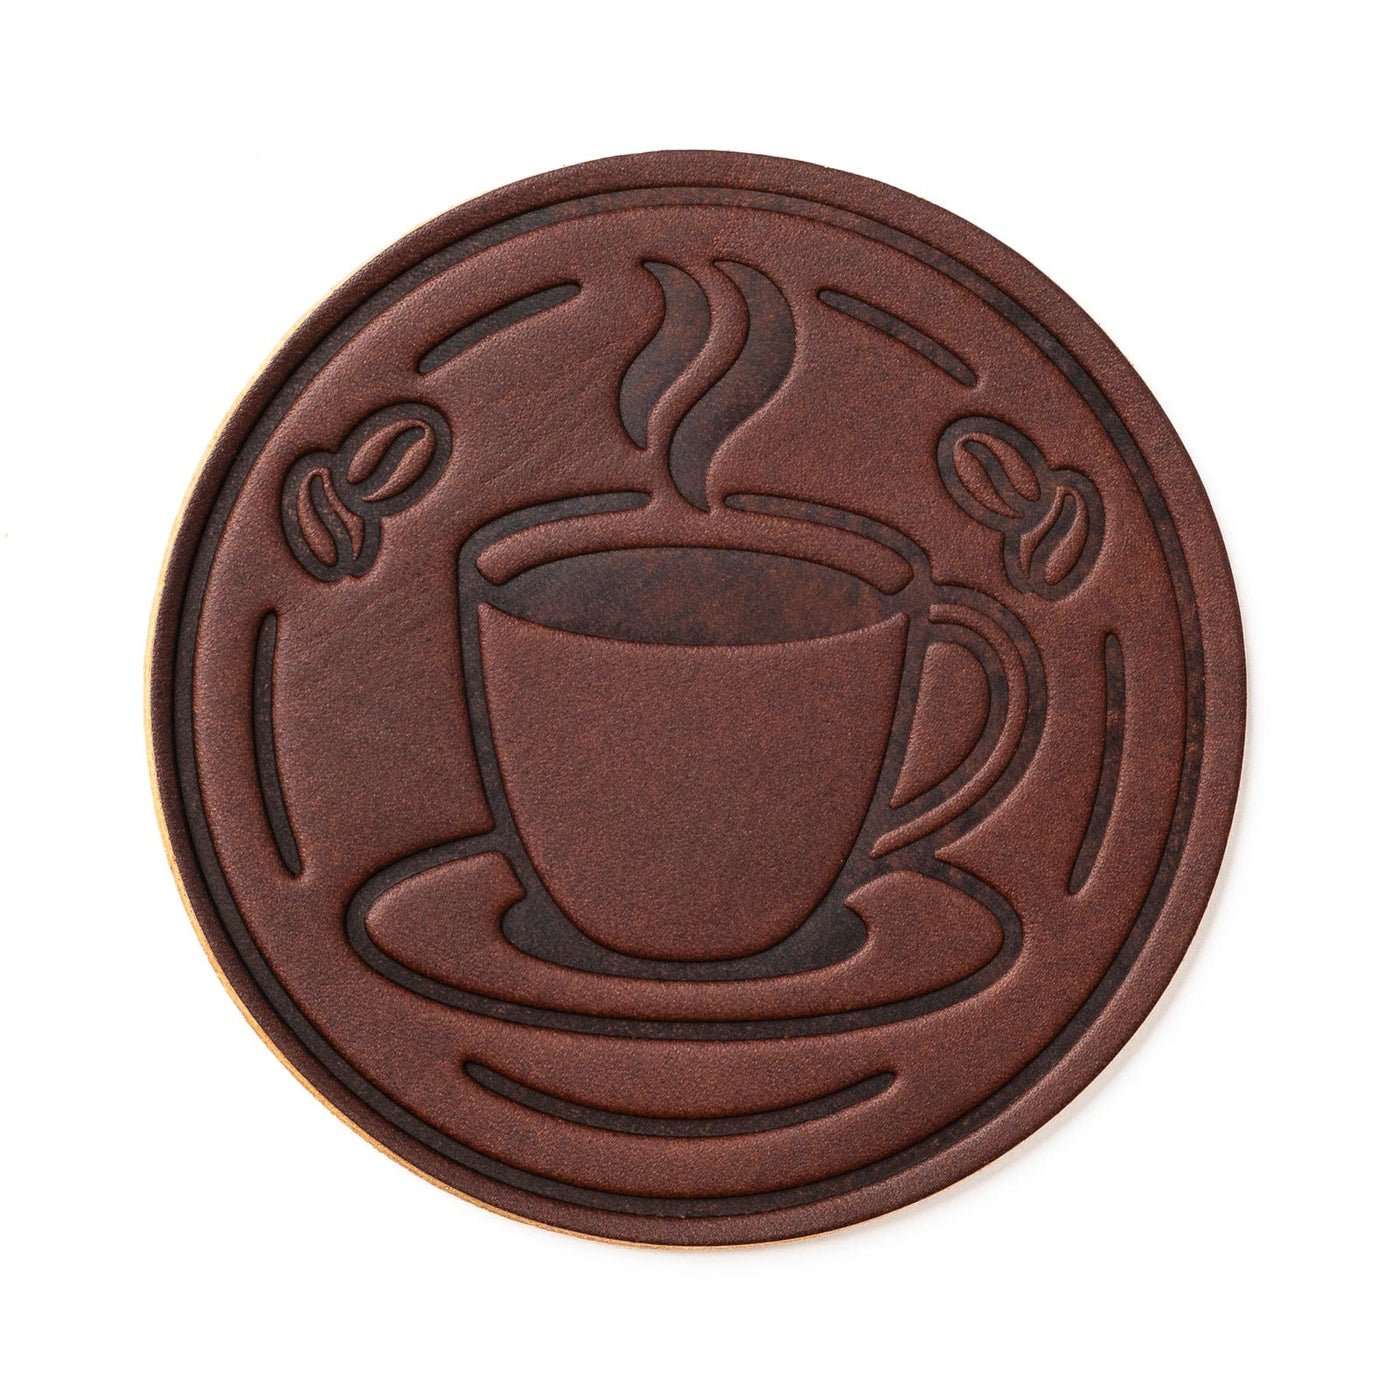 Coffee Coasters - Heritage Brown - 4 Pack Popov Leather